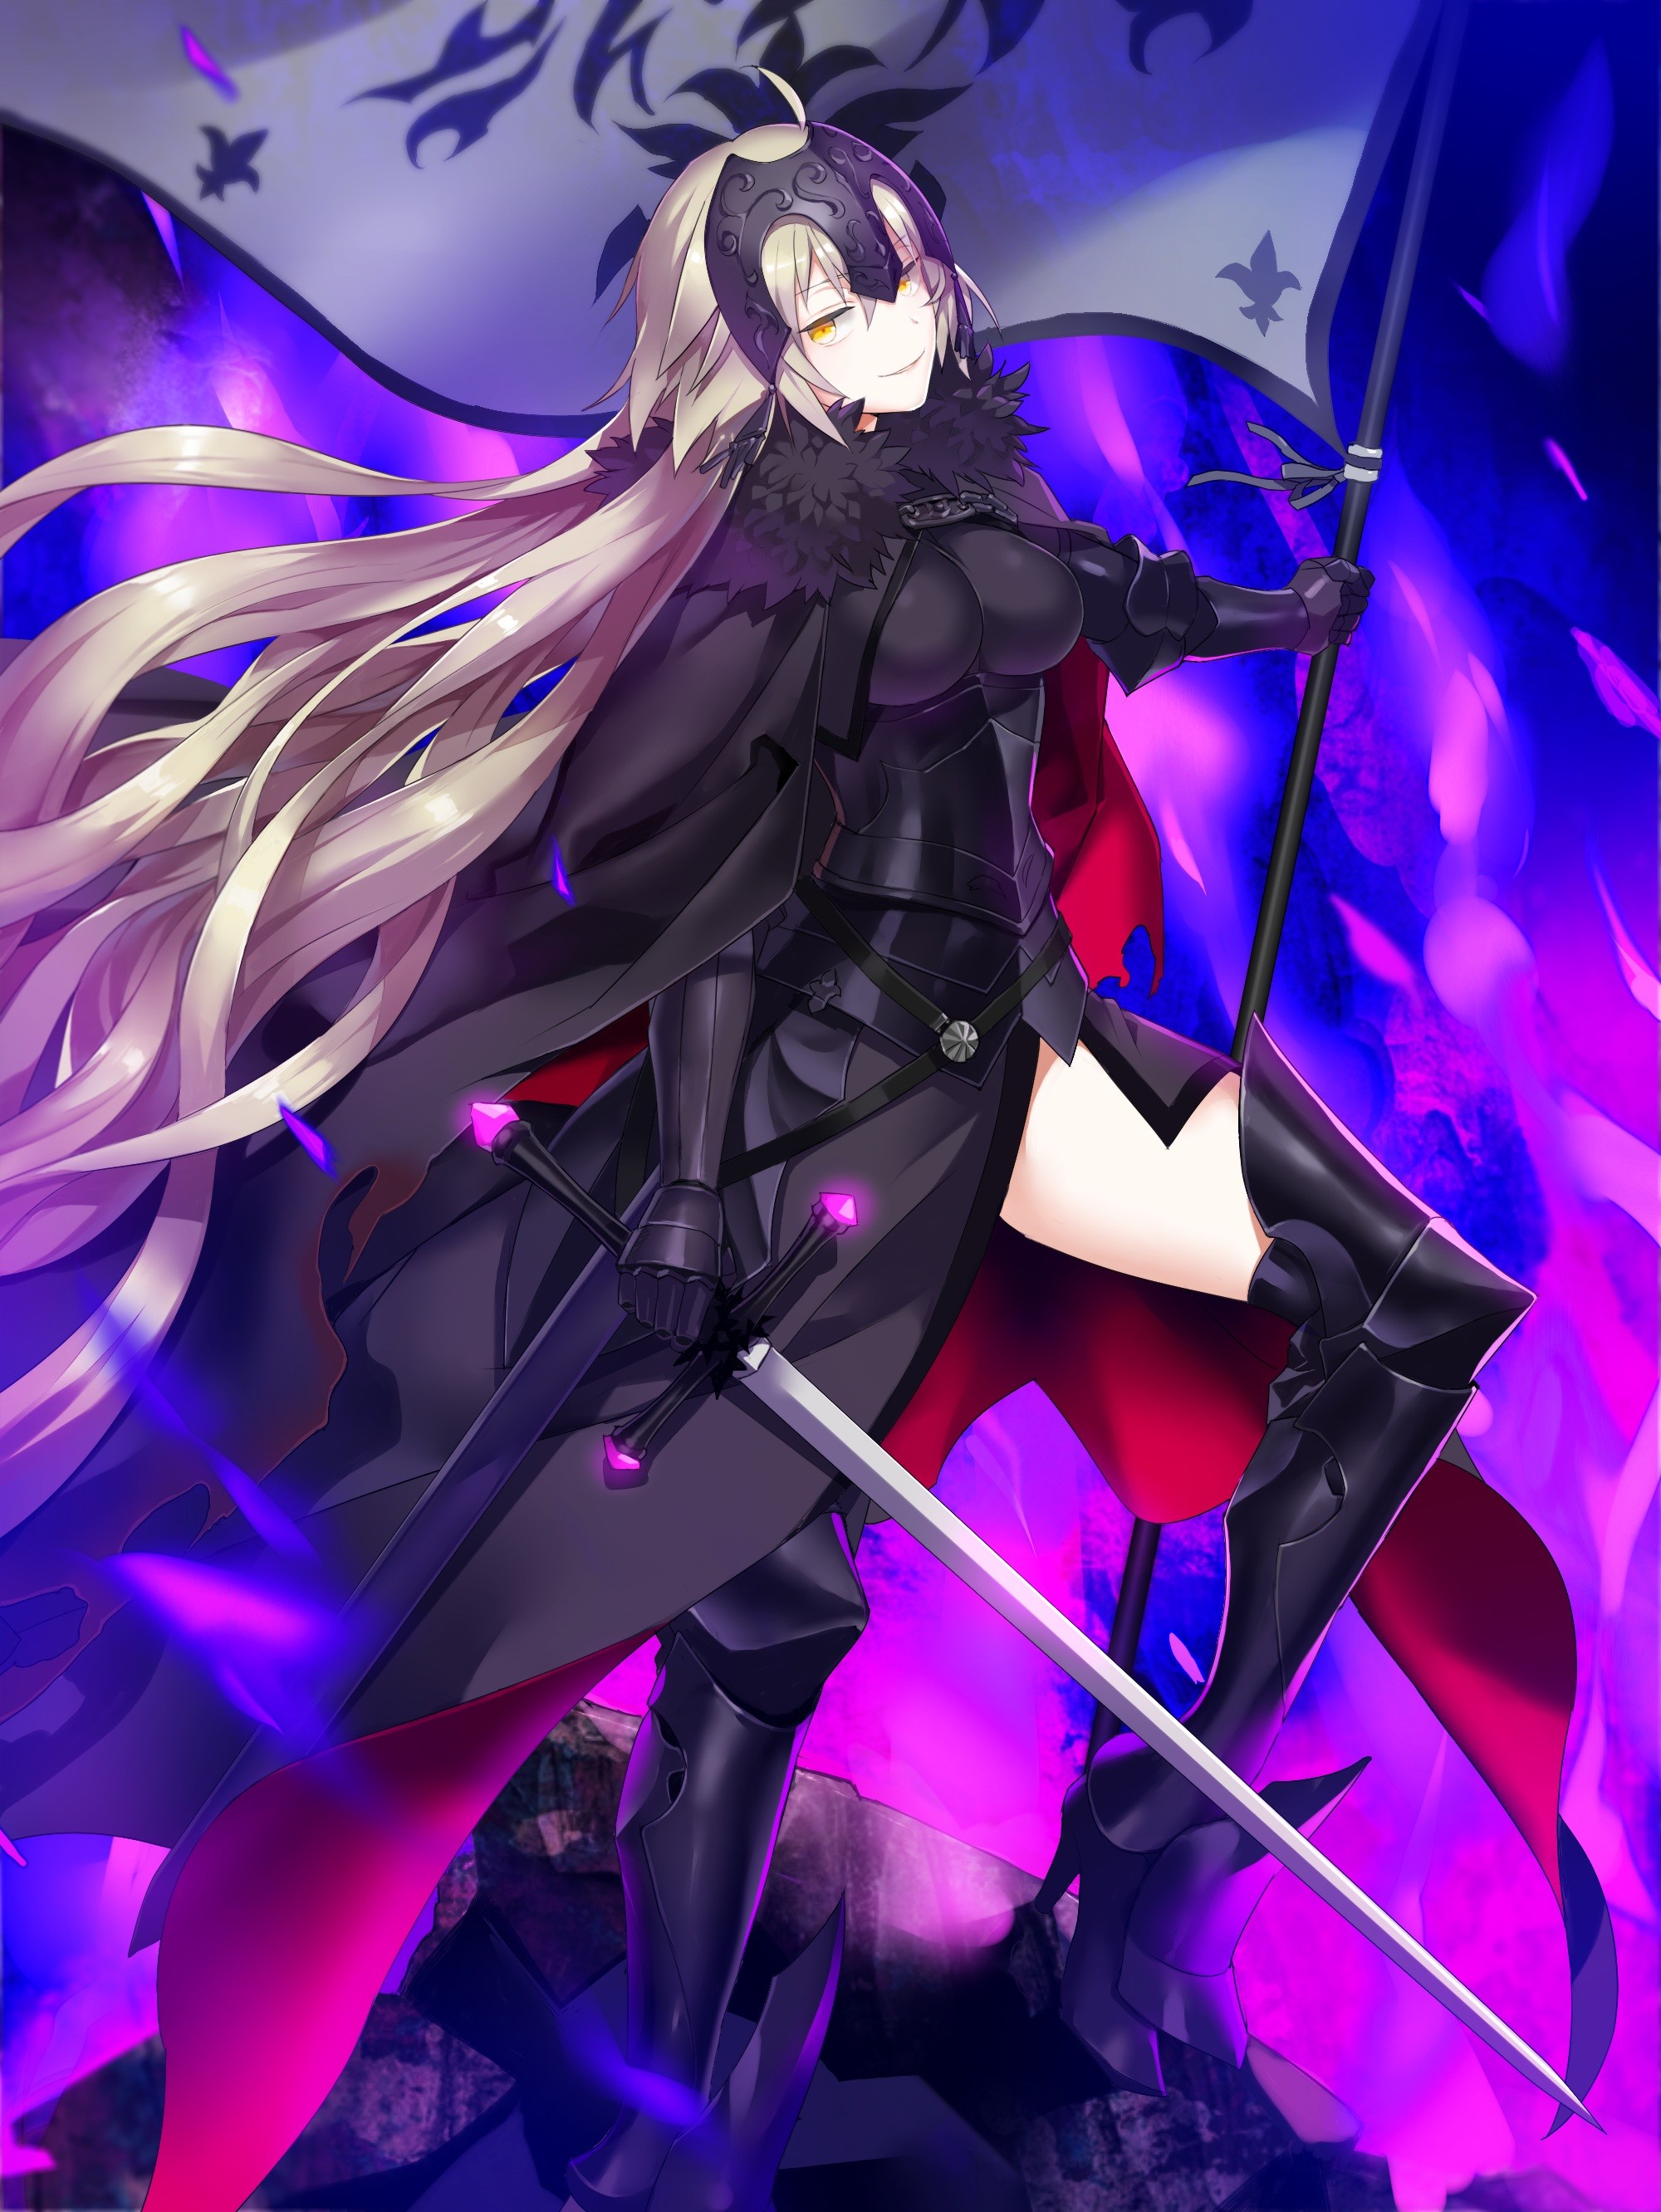 Anime 2000x2664 anime anime girls Fate/Apocrypha  Fate/Grand Order Fate/Stay Night Ruler (Fate/Grand Order) armor heels sword long hair weapon Pixiv banner women with swords fantasy art fantasy girl